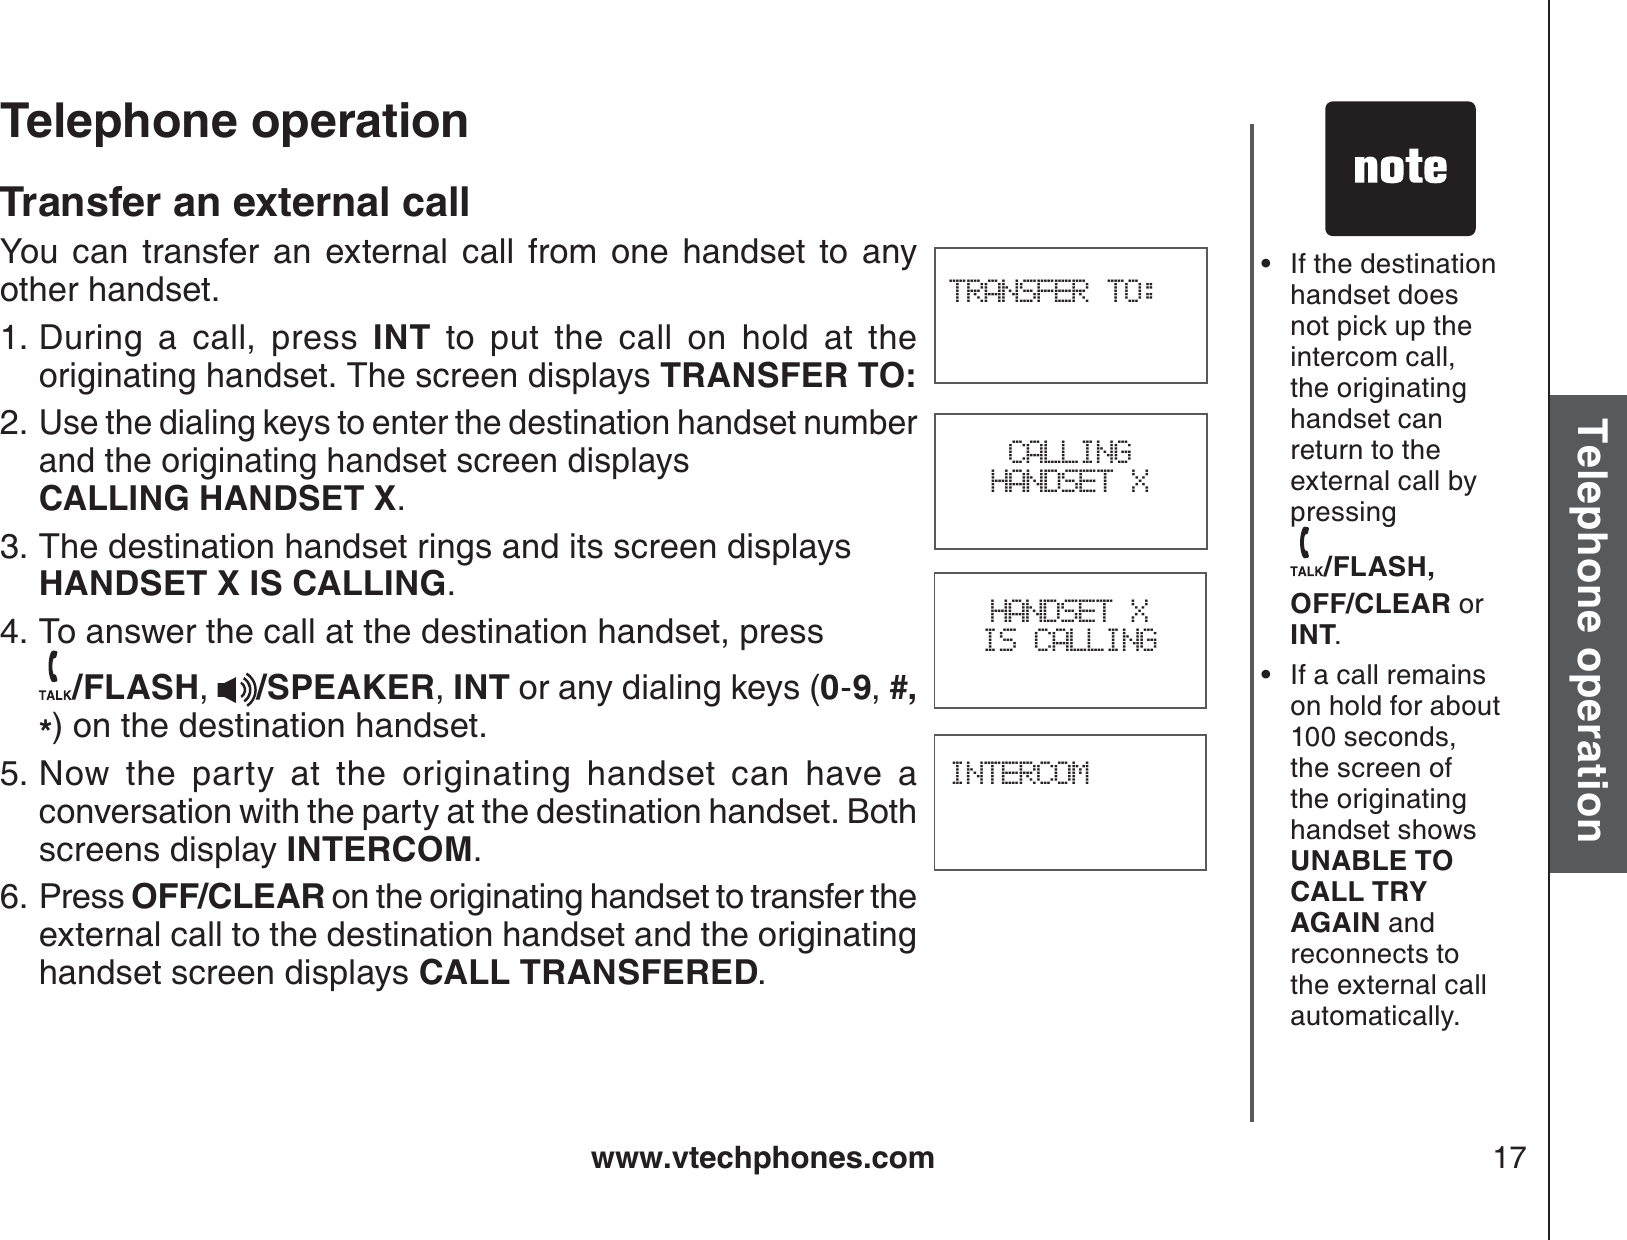 www.vtechphones.com 17Basic operationTelephone operationTelephone operationTransfer an external callYou can transfer an external call from one handset to any other handset. During a call, press INT to put the call on hold at the originating handset. The screen displays TRANSFER TO:Use the dialing keys to enter the destination handset number and the originating handset screen displays    CALLING HANDSET X.The destination handset rings and its screen displays HANDSET X IS CALLING.To answer the call at the destination handset, press   /FLASH,/SPEAKER,INT or any dialing keys (0-9,#,*) on the destination handset.Now the party at the originating handset can have a conversation with the party at the destination handset. Both screens display INTERCOM.Press OFF/CLEAR on the originating handset to transfer the external call to the destination handset and the originating handset screen displays CALL TRANSFERED.1.2.3.4.5.6.If the destination handset does not pick up the intercom call, the originating handset can return to the external call by pressing /FLASH, OFF/CLEAR orINT.If a call remains on hold for about 100 seconds, the screen of the originating handset shows UNABLE TO CALL TRY AGAIN and reconnects to the external call automatically. ••TRANSFER TO:INTERCOMHANDSET X IS CALLINGCALLINGHANDSET X